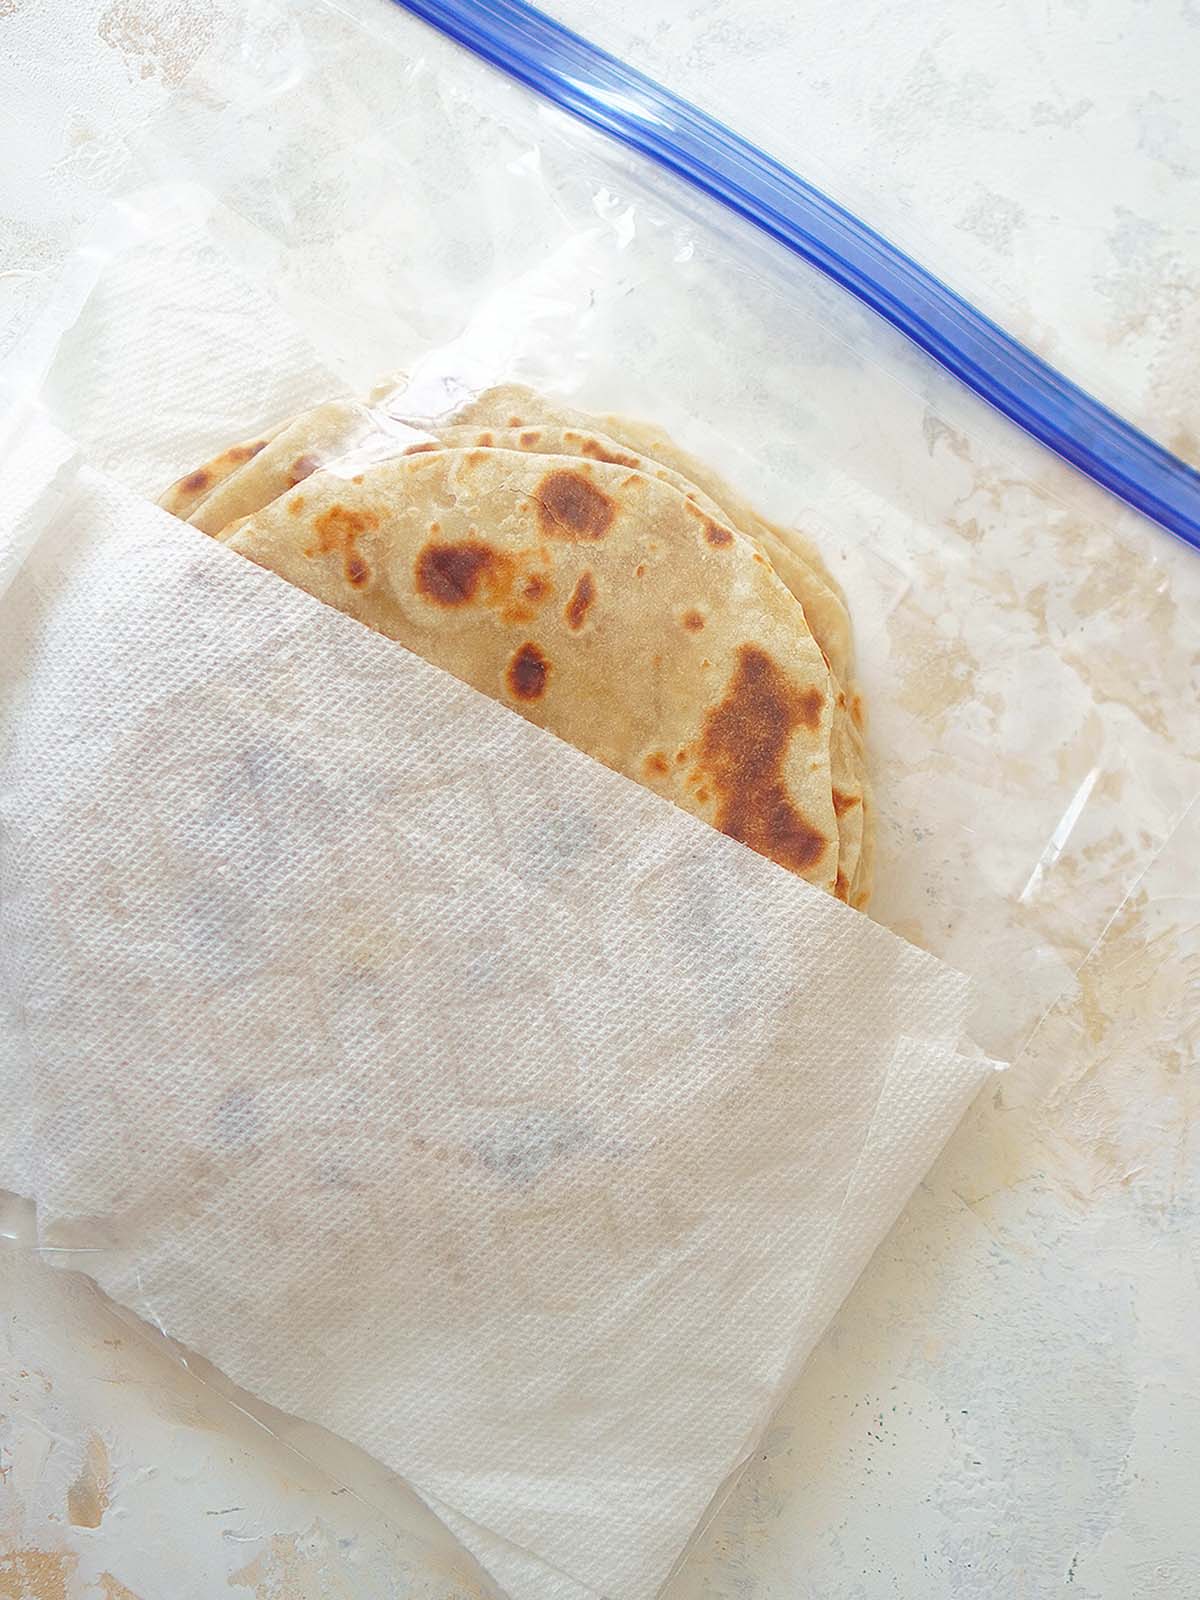 Tortillas stored inside a ziploc bag along with paper towels inside too.